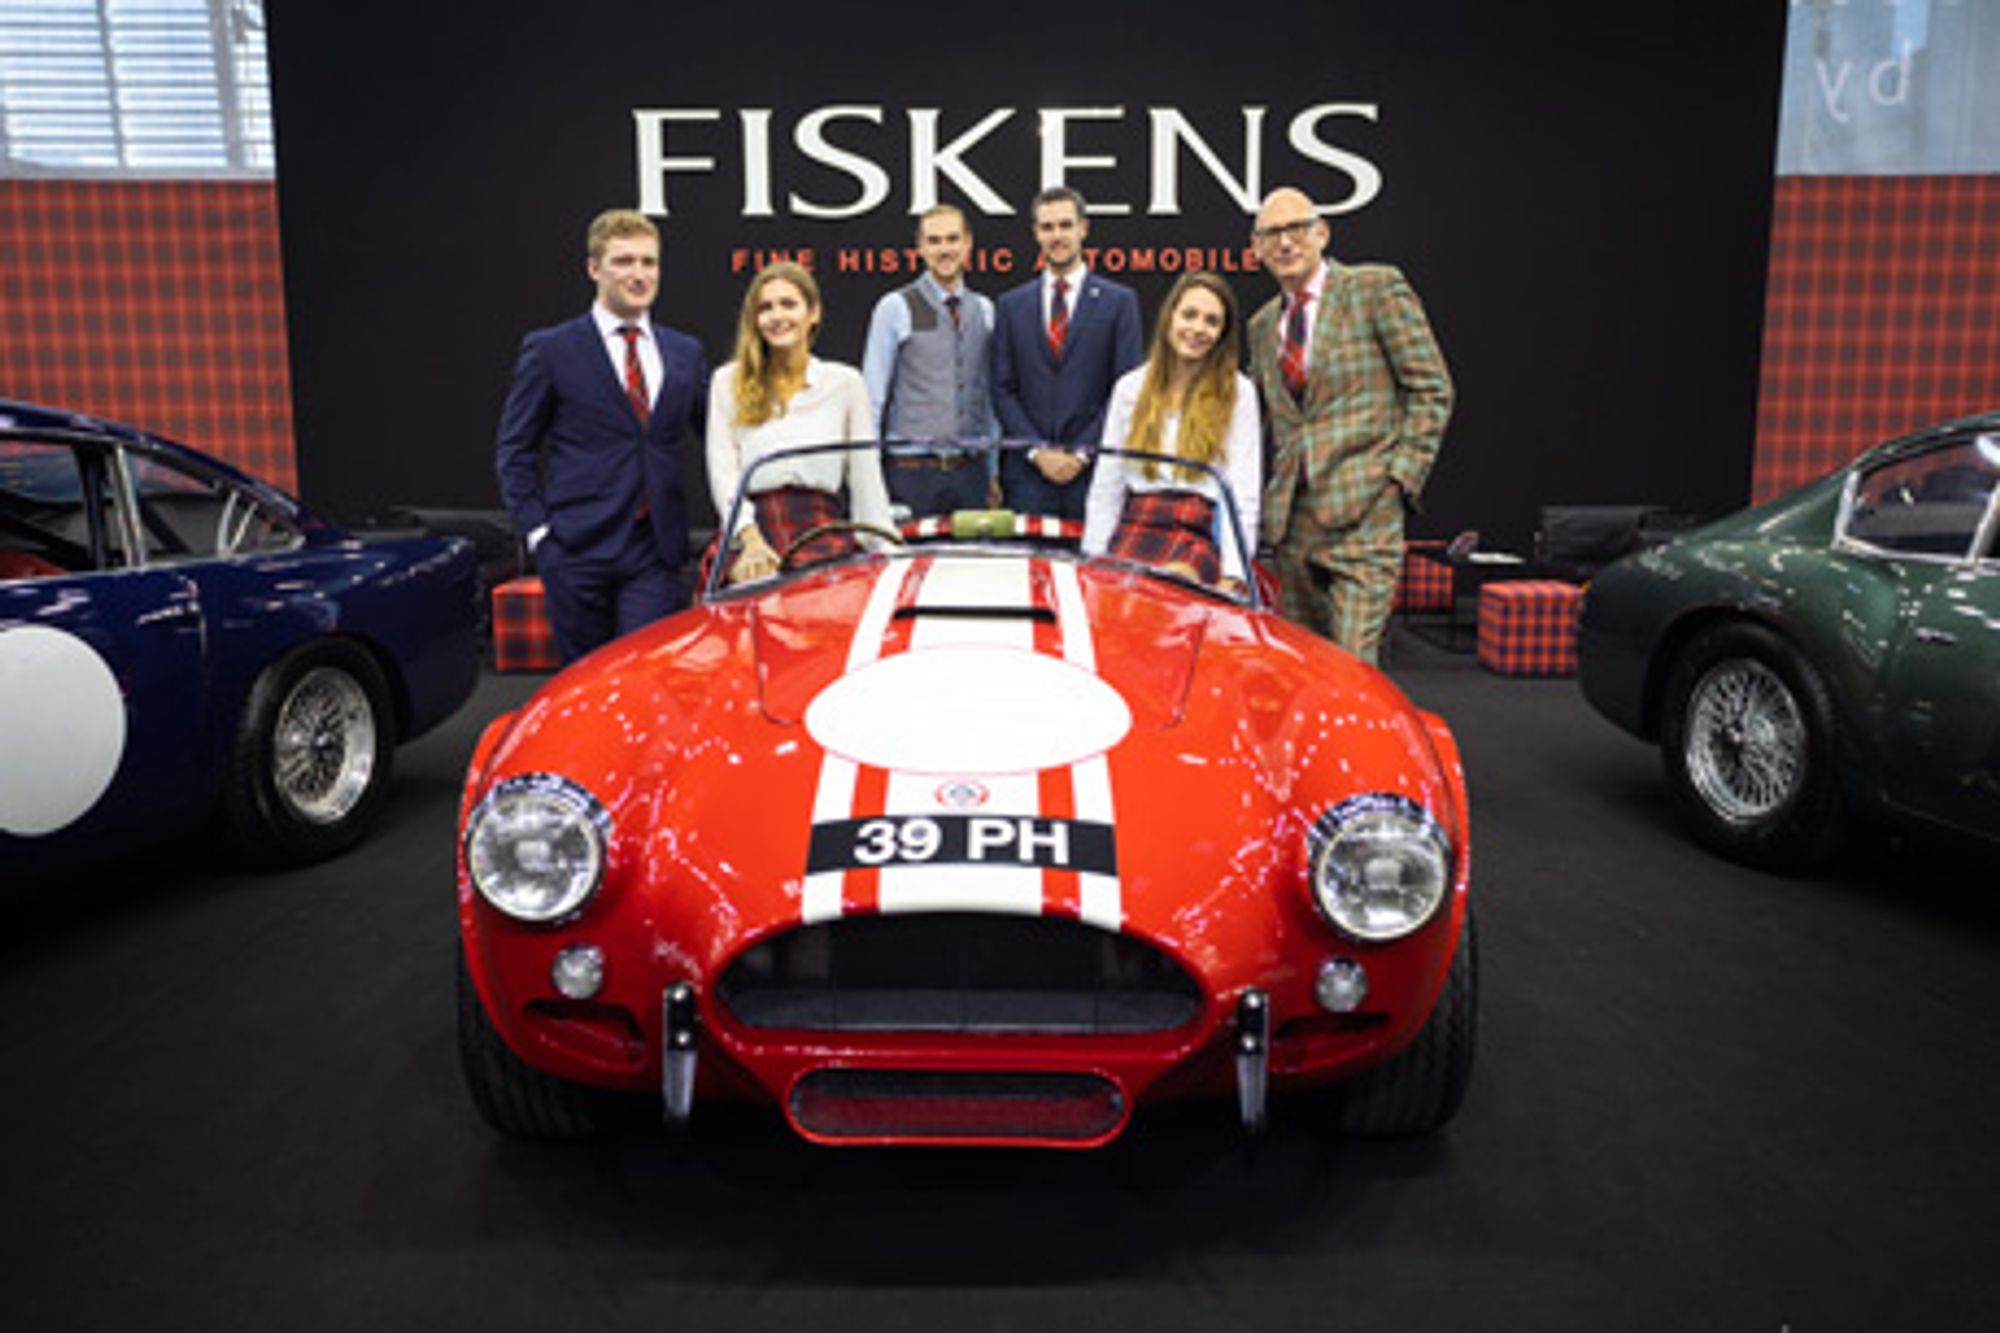 Fiskens has returned from Retromobile and has finally caught their breath after the team's annual trip to Paris